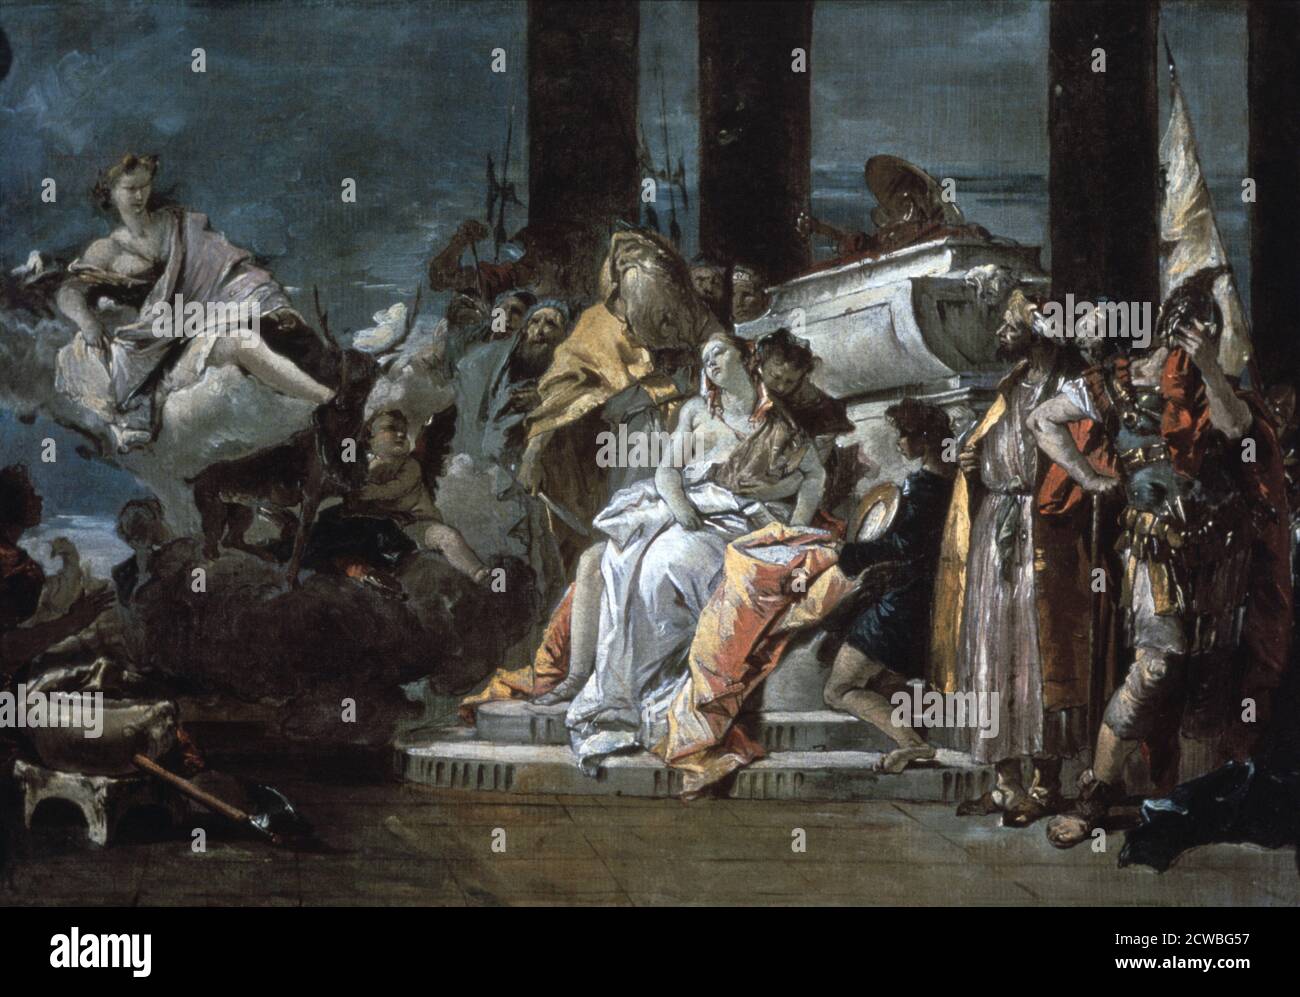 Sacrifice of Iphigenia' by Giovanni Battista Tiepolo, 1735. Artemis, the Greek goddess of hunting, watches the preparations for the sacrifice of Iphigenia, daughter of Agamemnon, that she has demanded. From the University of Arizona Museum of Art, Tucson, Arizona, USA. Stock Photo